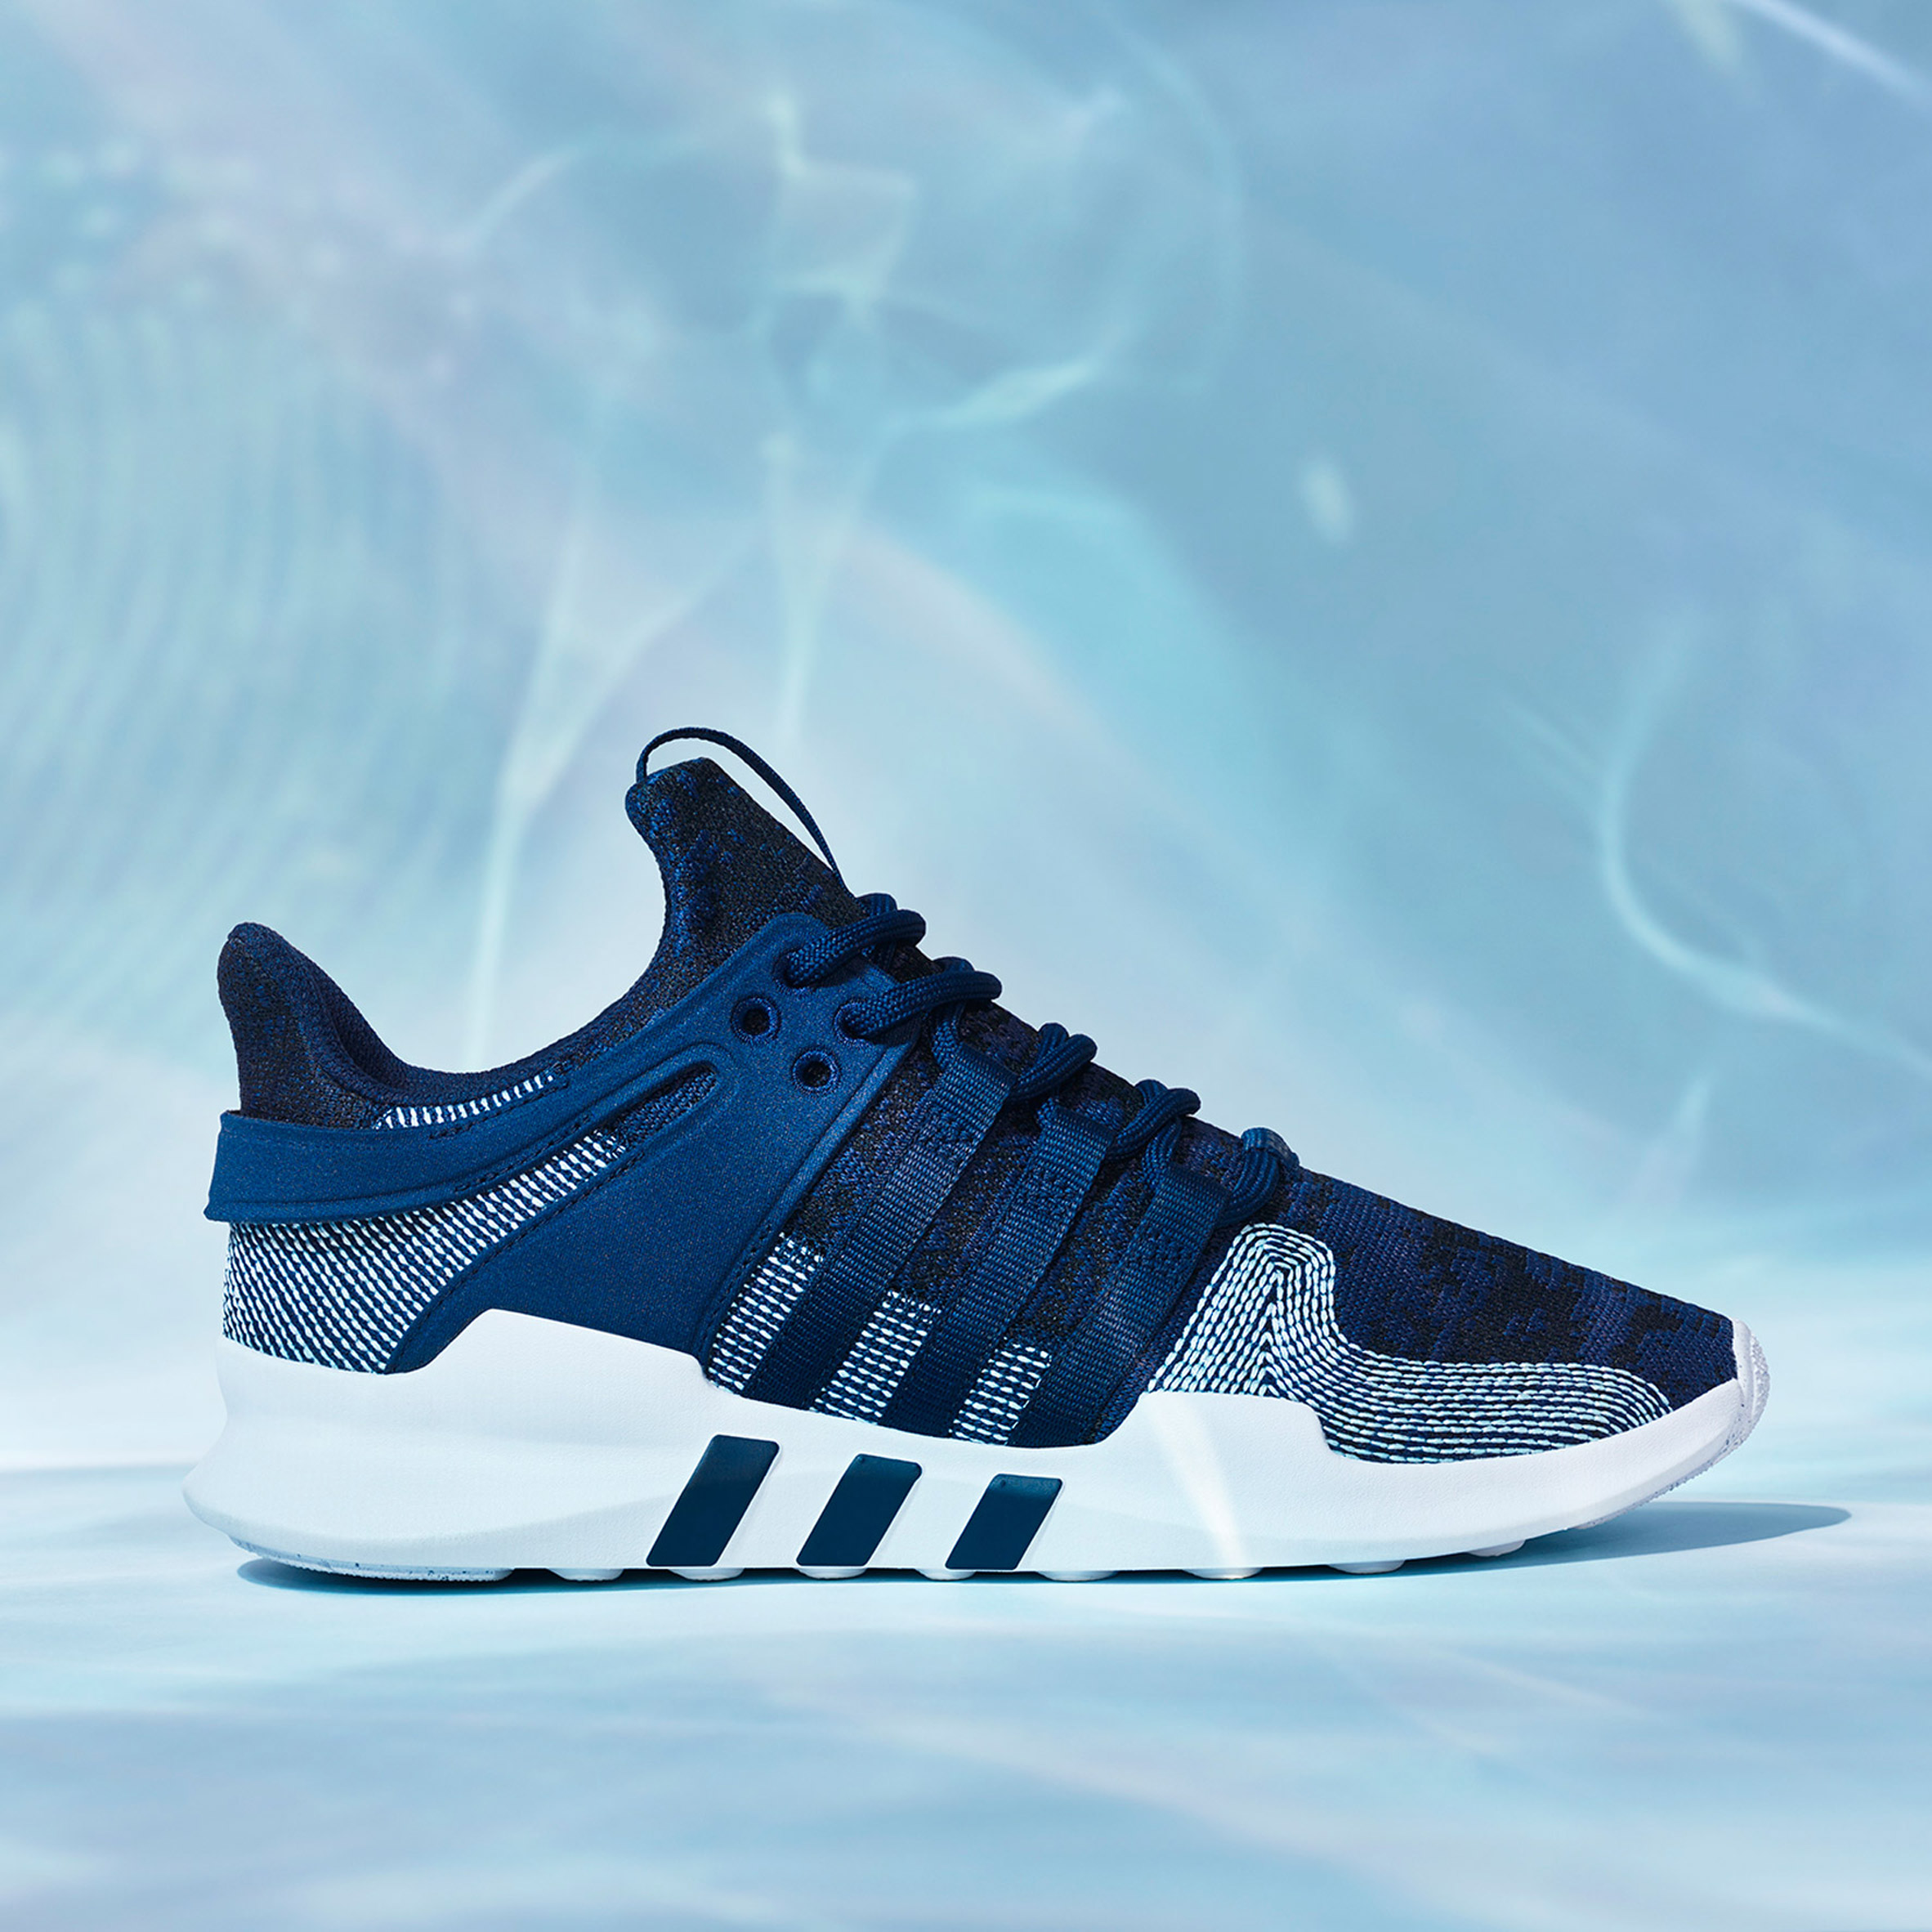 Adidas uses Parley ocean plastic to update one of its classic shoe designs